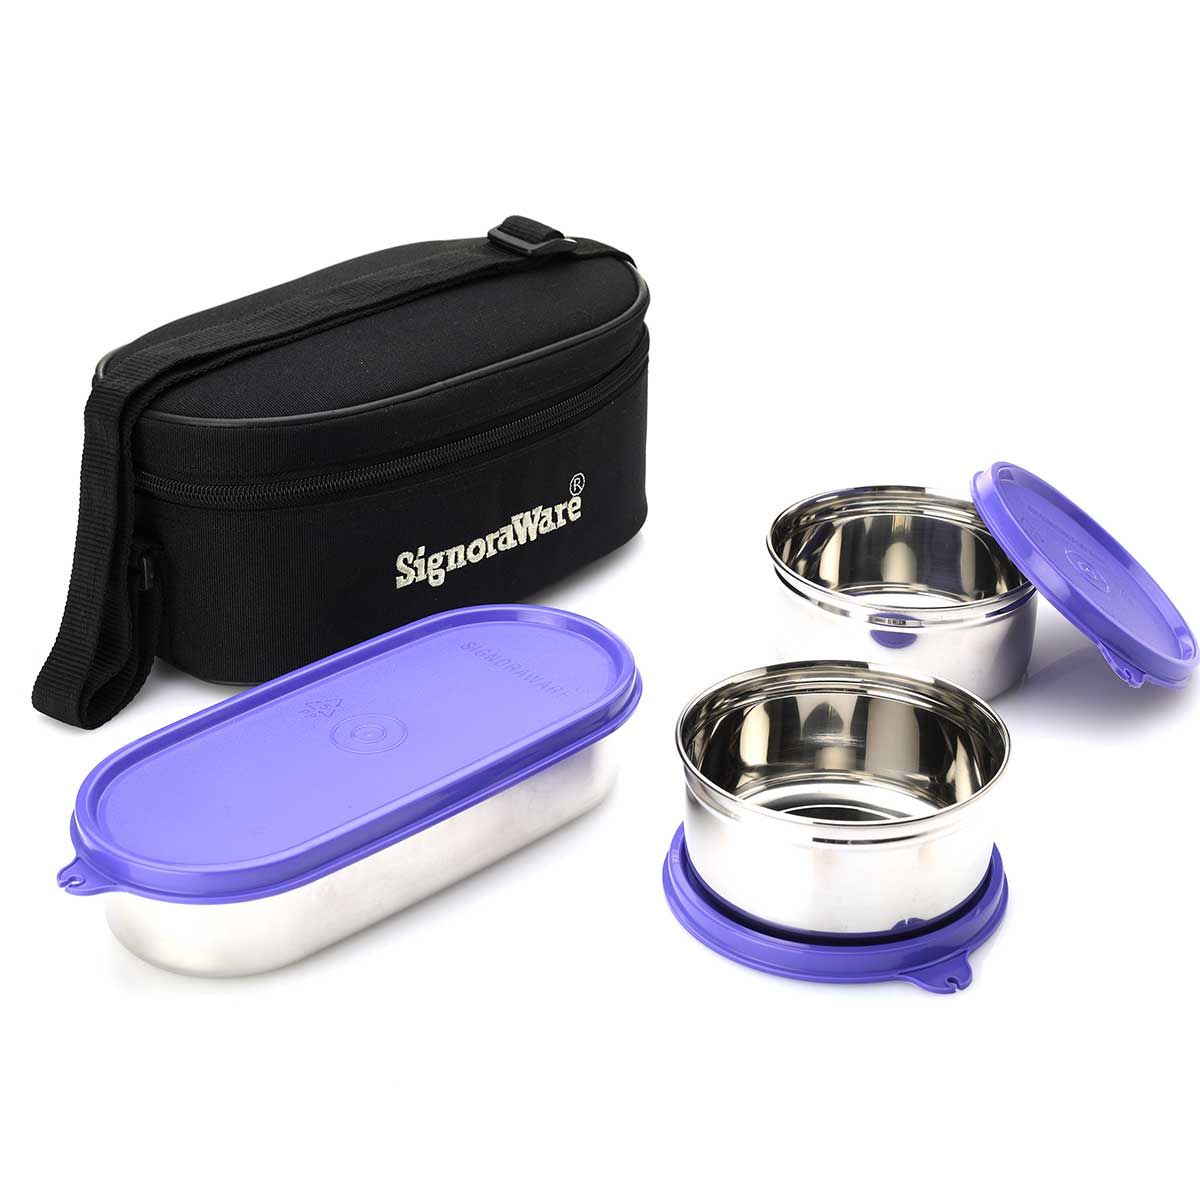 Signoraware Double Decker Special Steel Stainless Steel Lunch Box with Bag